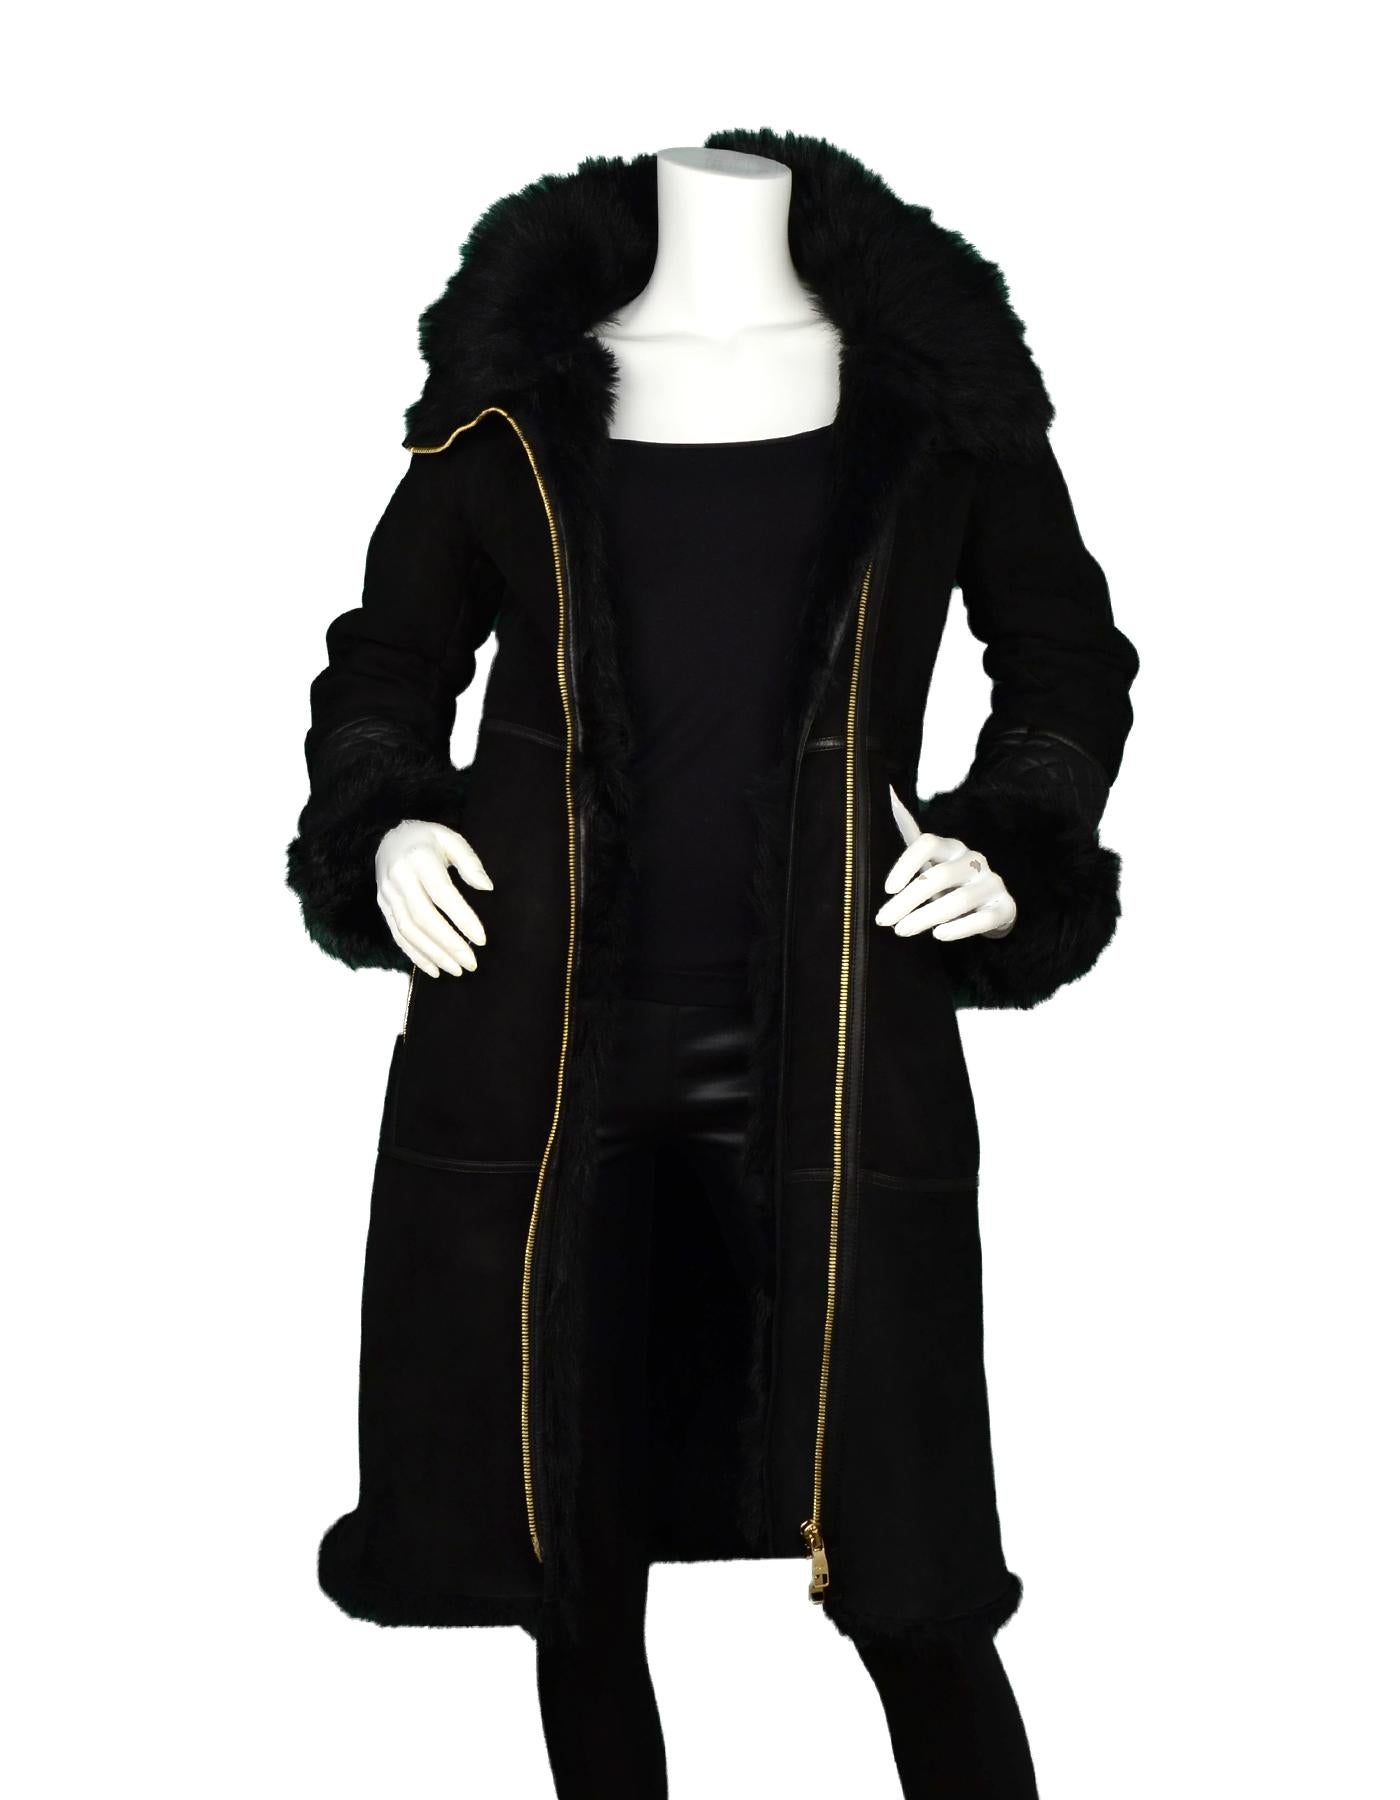 Ferragamo Black Shearling Coat W/ Quilted Leather & Fur Trim Sz US2

Made In: Italy
Color: Black
Materials: Real leather, lamb shearling 
Padding: 100% polyurethane 
Opening/Closure: Goldtone two way zipper
Overall Condition: Excellent pre-owned